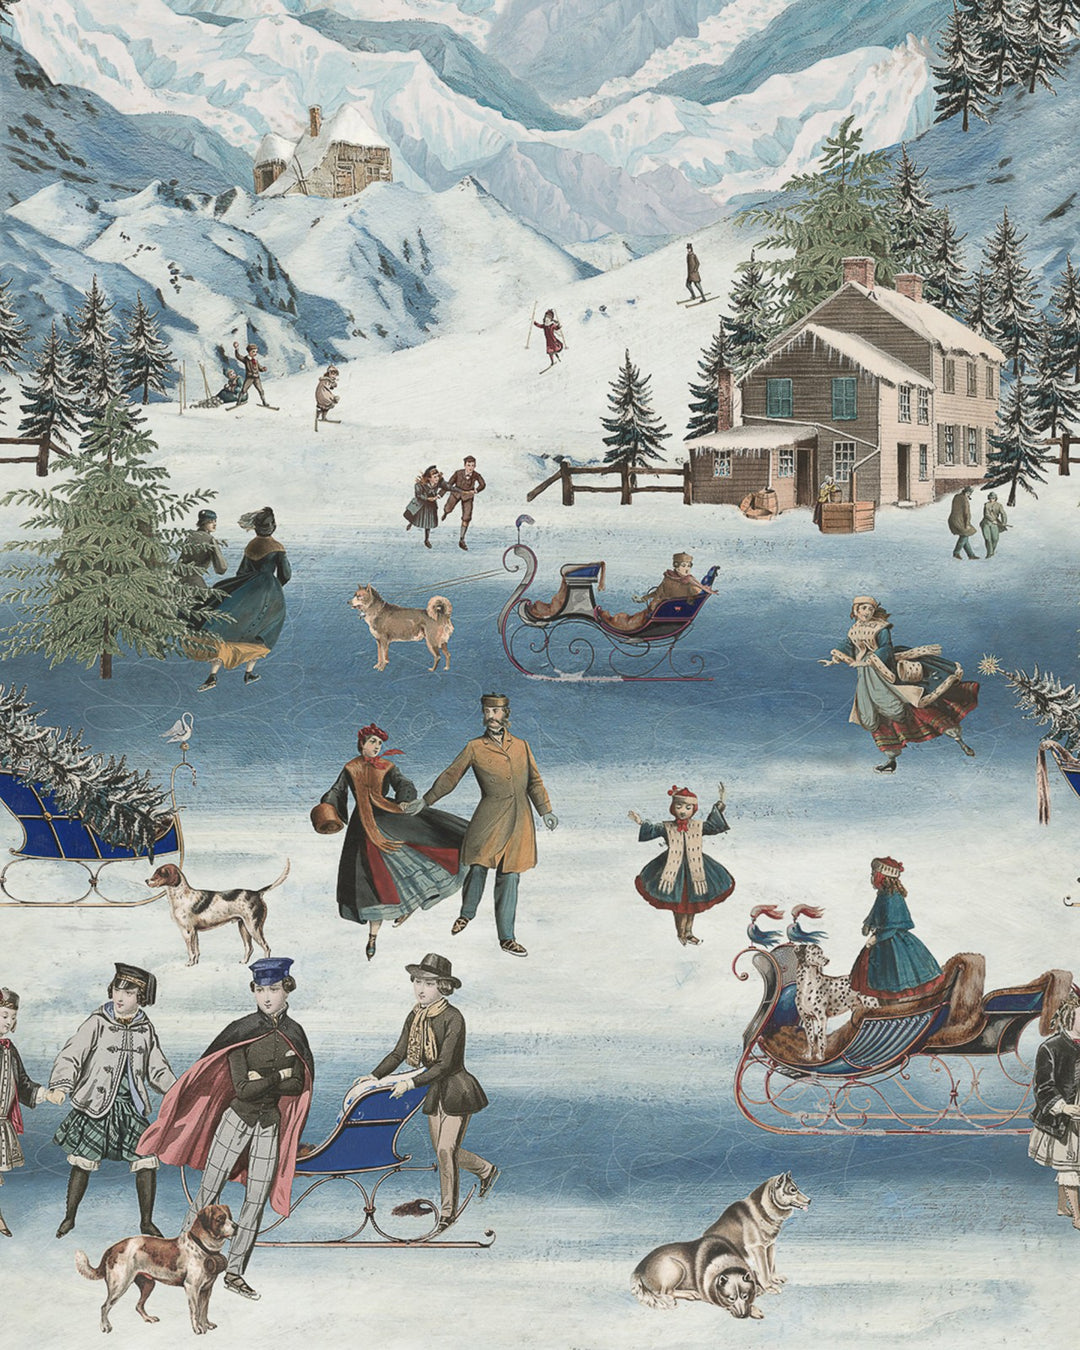 Mind-the-gap-Tyrol-Alpone-ski-collection-Vintage-christmas-skiiers-skaters-winter-snow-mural-apres-ski-chalet-cabin-mountain-Kaprin-illustration-wallpaper-drawing-painting-style-wall-feature